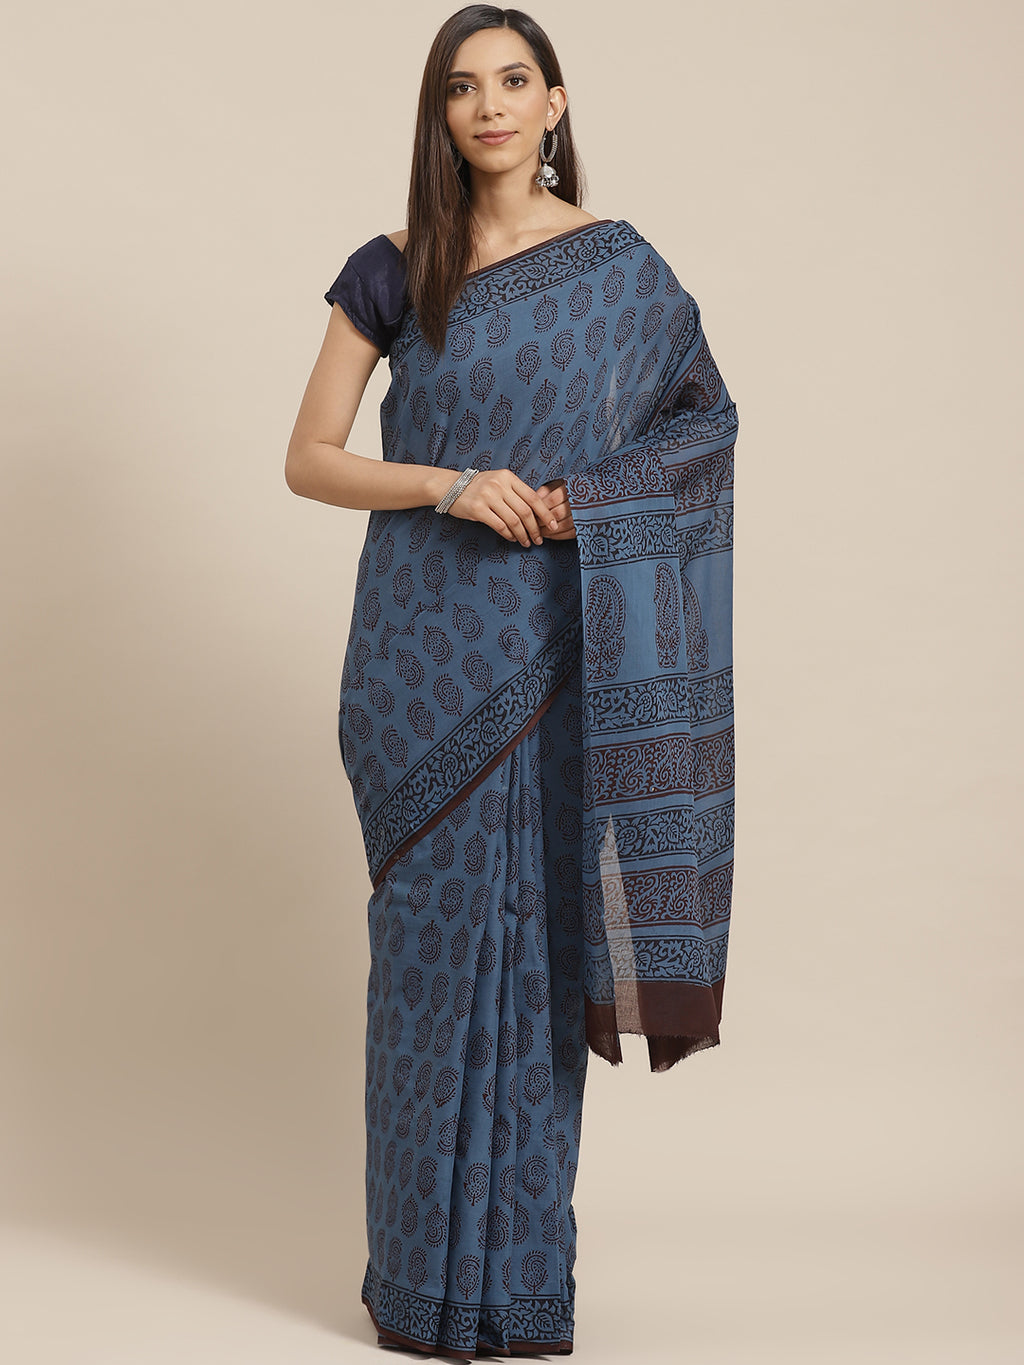 Blue and Brown, Kalakari India Pure Cotton Hand Block Printed Saree and Blouse BAPASA0092-Saree-Kalakari India-BAPASA0092-Block Print, Cotton, Geographical Indication, Hand Crafted, Heritage Prints, Natural Dyes, Red, Sarees, Sustainable Fabrics, Woven, Yellow-[Linen,Ethnic,wear,Fashionista,Handloom,Handicraft,Indigo,blockprint,block,print,Cotton,Chanderi,Blue, latest,classy,party,bollywood,trendy,summer,style,traditional,formal,elegant,unique,style,hand,block,print, dabu,booti,gift,present,glam